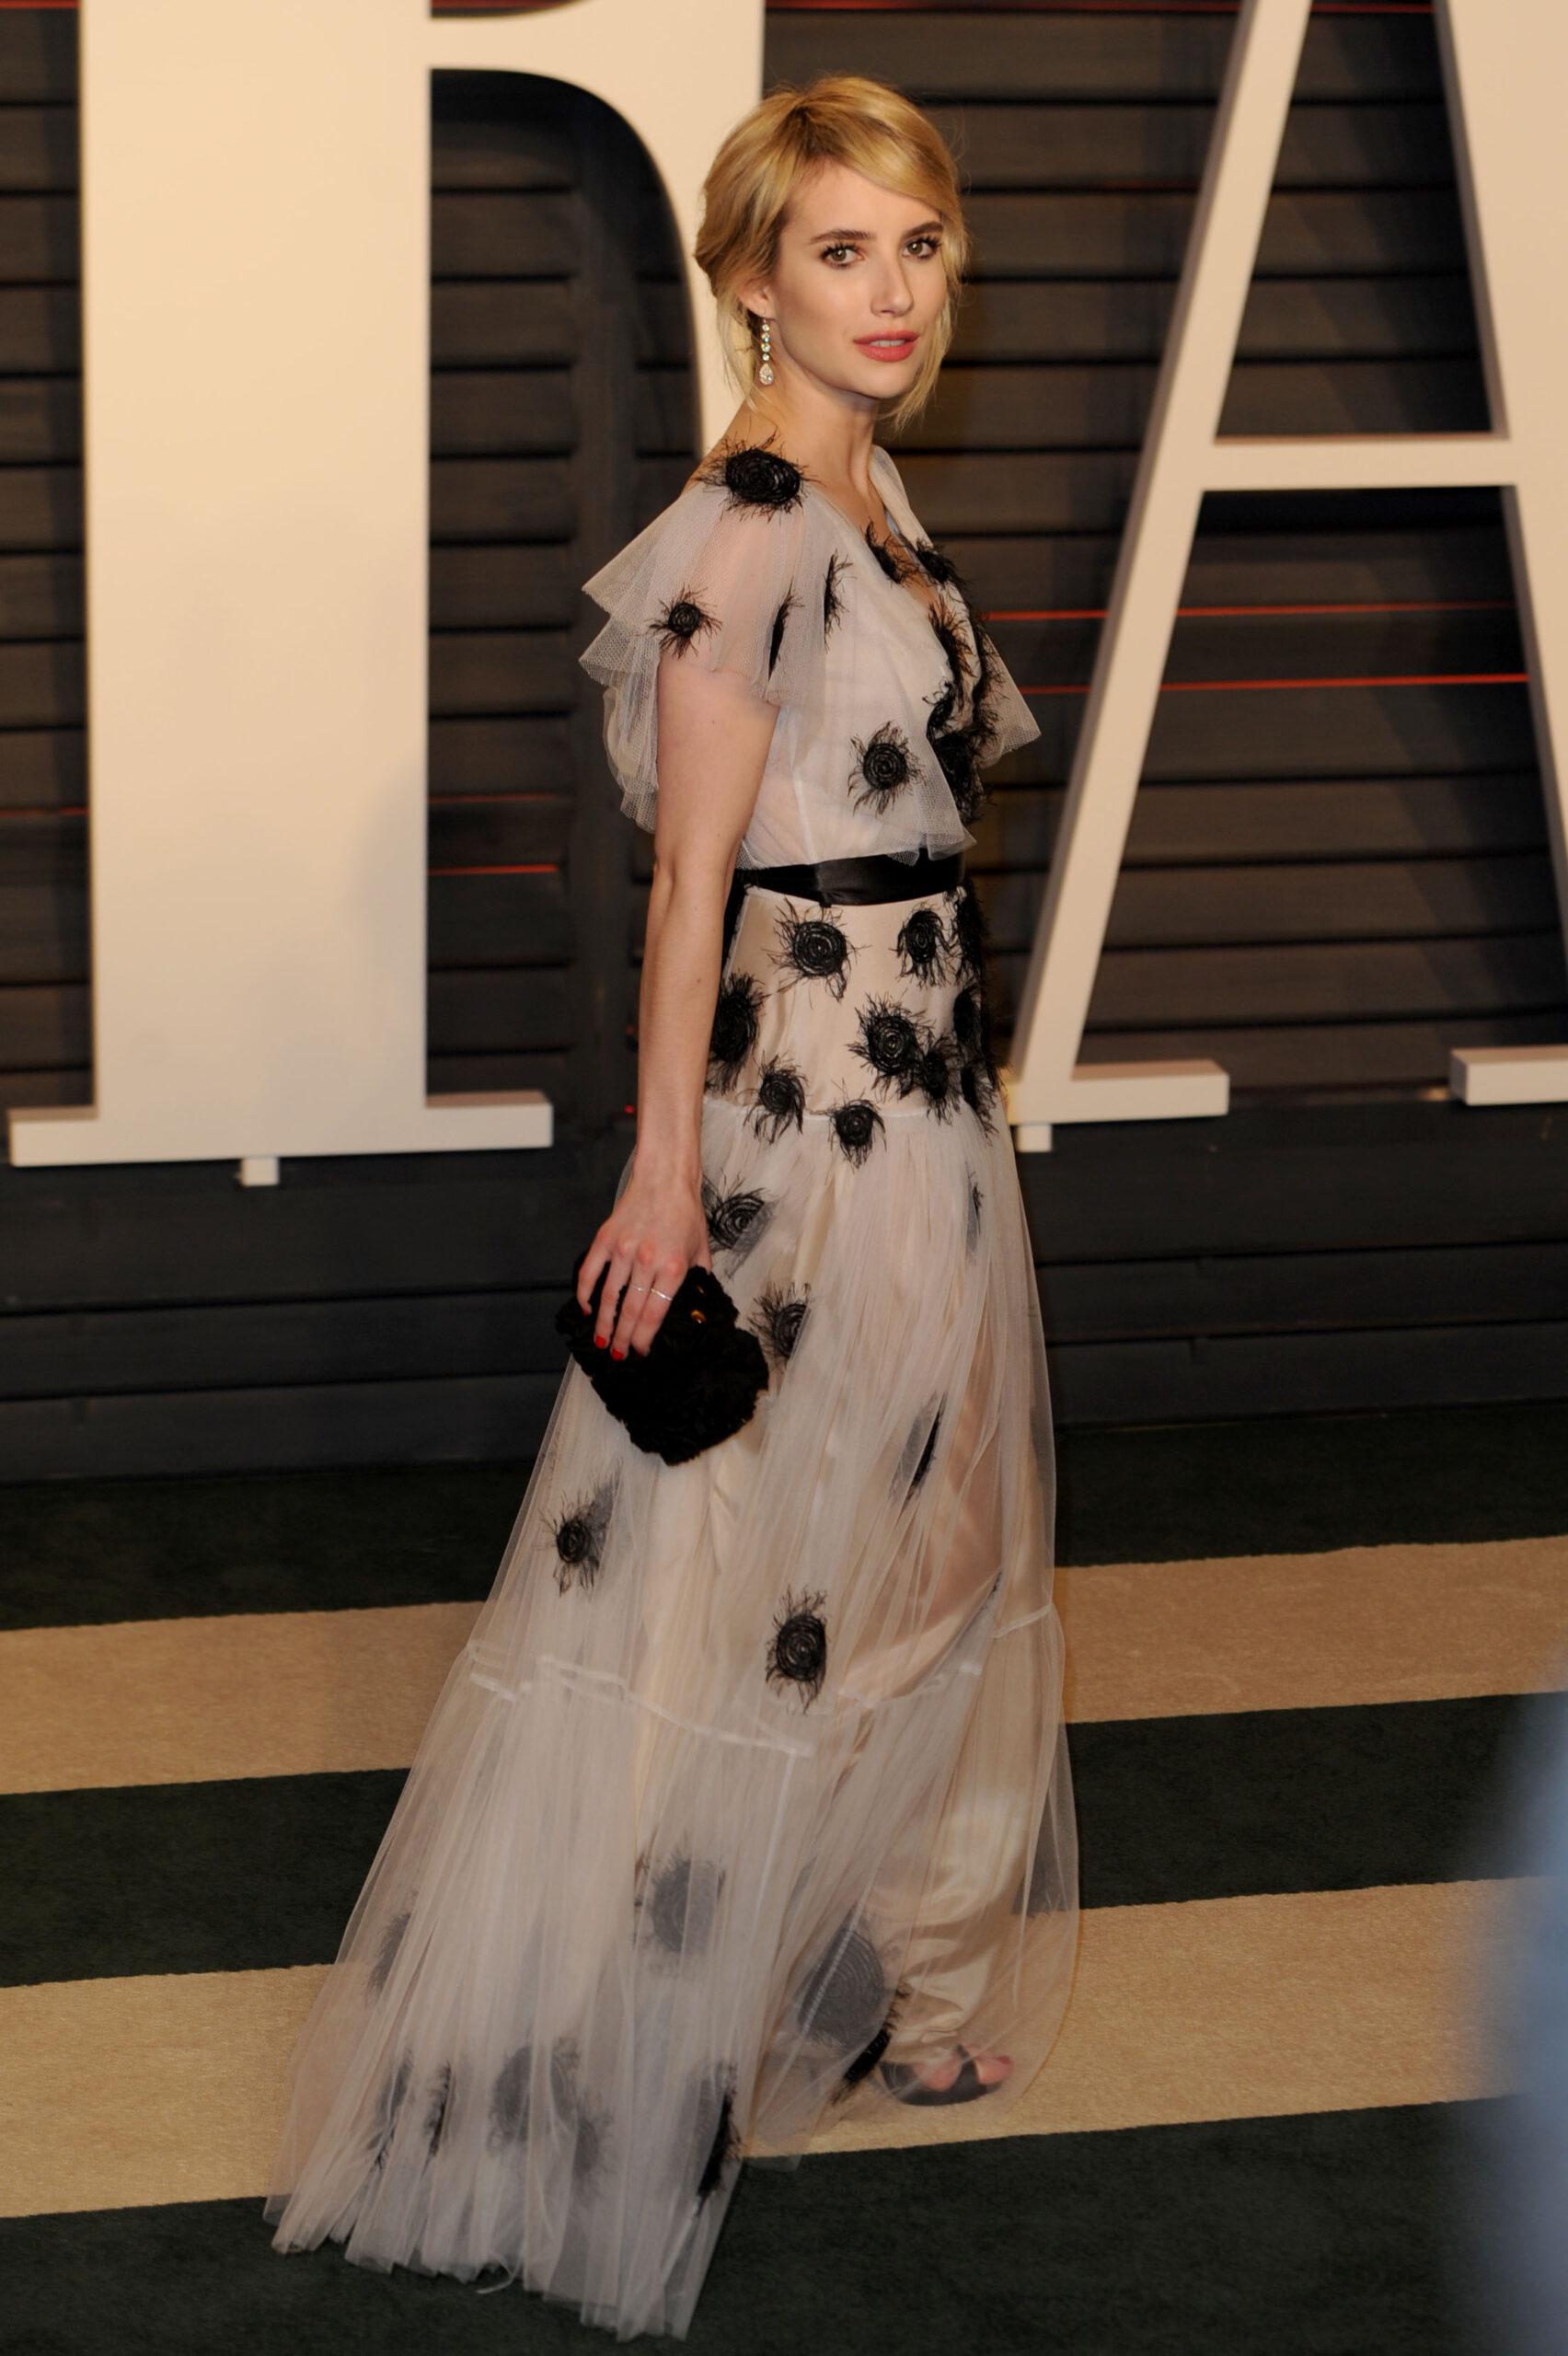 Emma Roberts poses on the red carpet at the Vanity Fair Oscar Party in LA